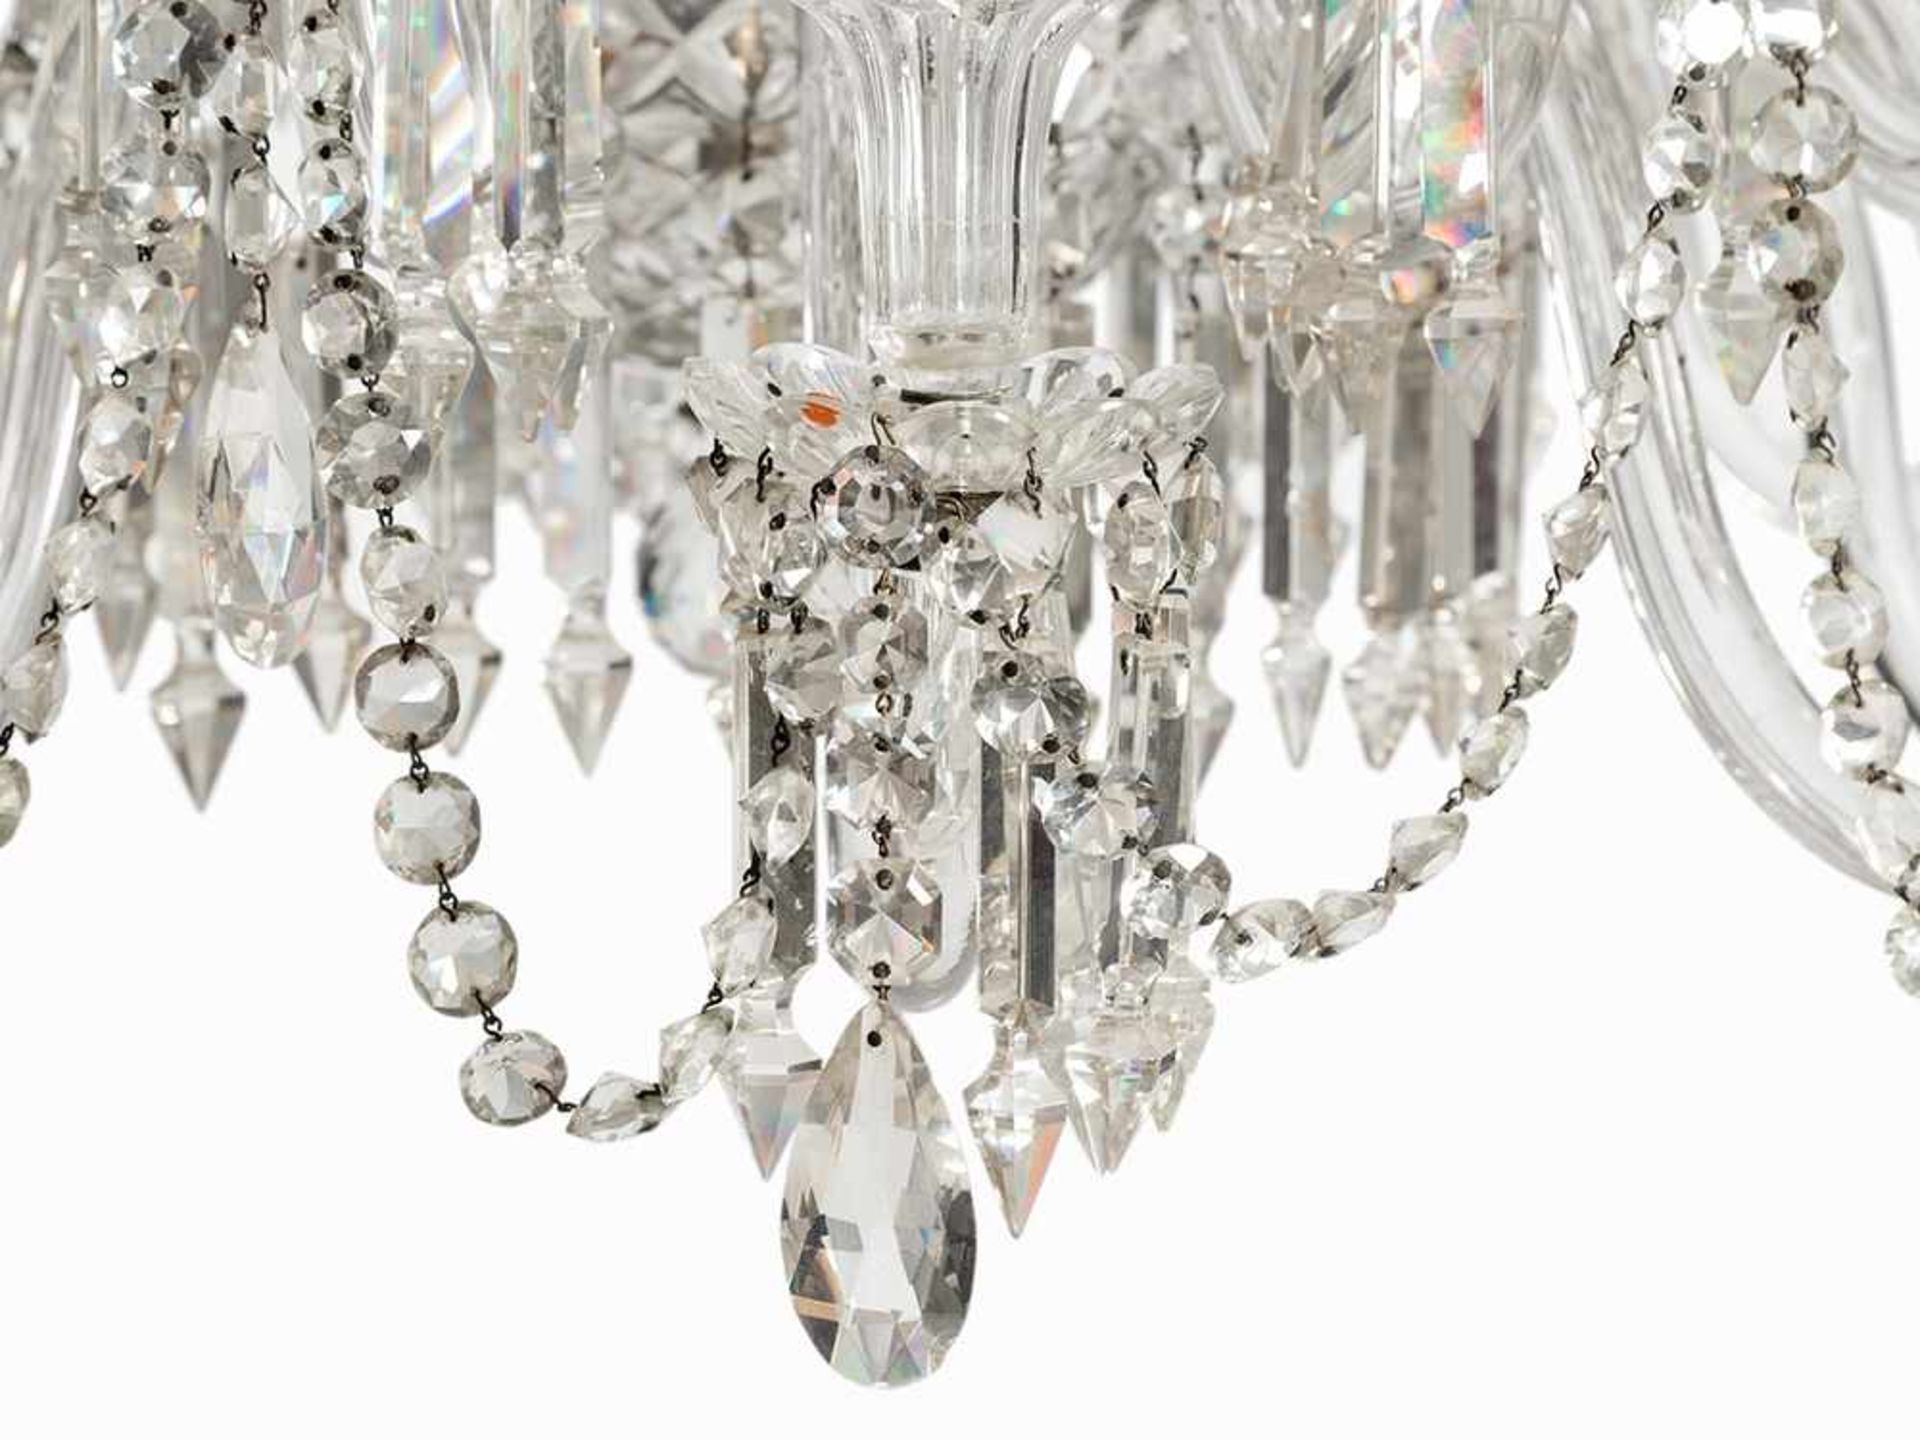 Magnificent Baccarat Chandelier, France, 19th C. Baccarat crystal France, 19th century 30 electric - Image 6 of 10